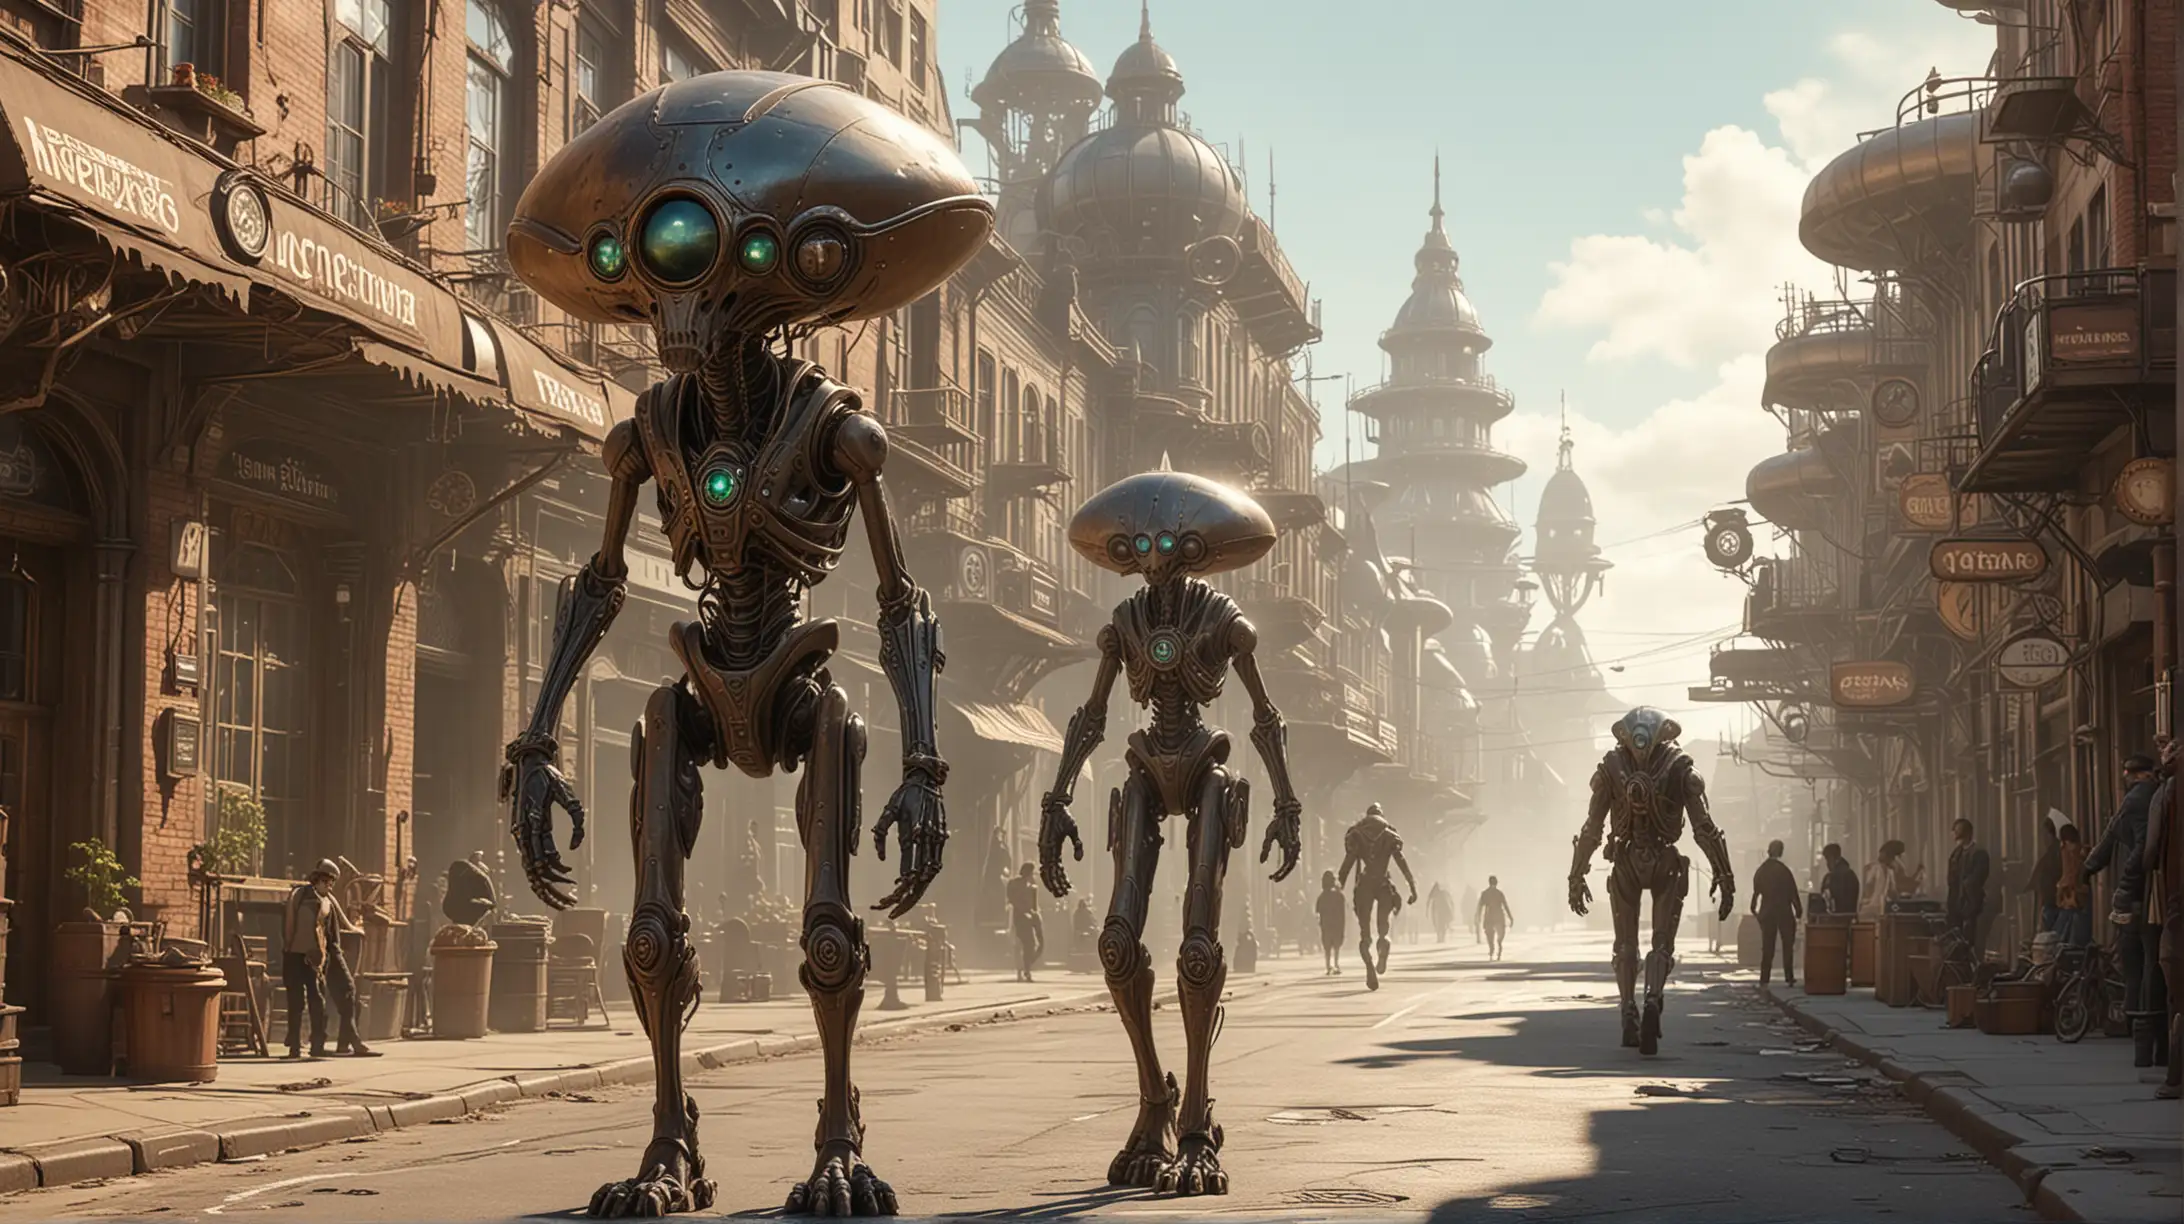 Two alien beings walk through the street of a steampunk city, sunny